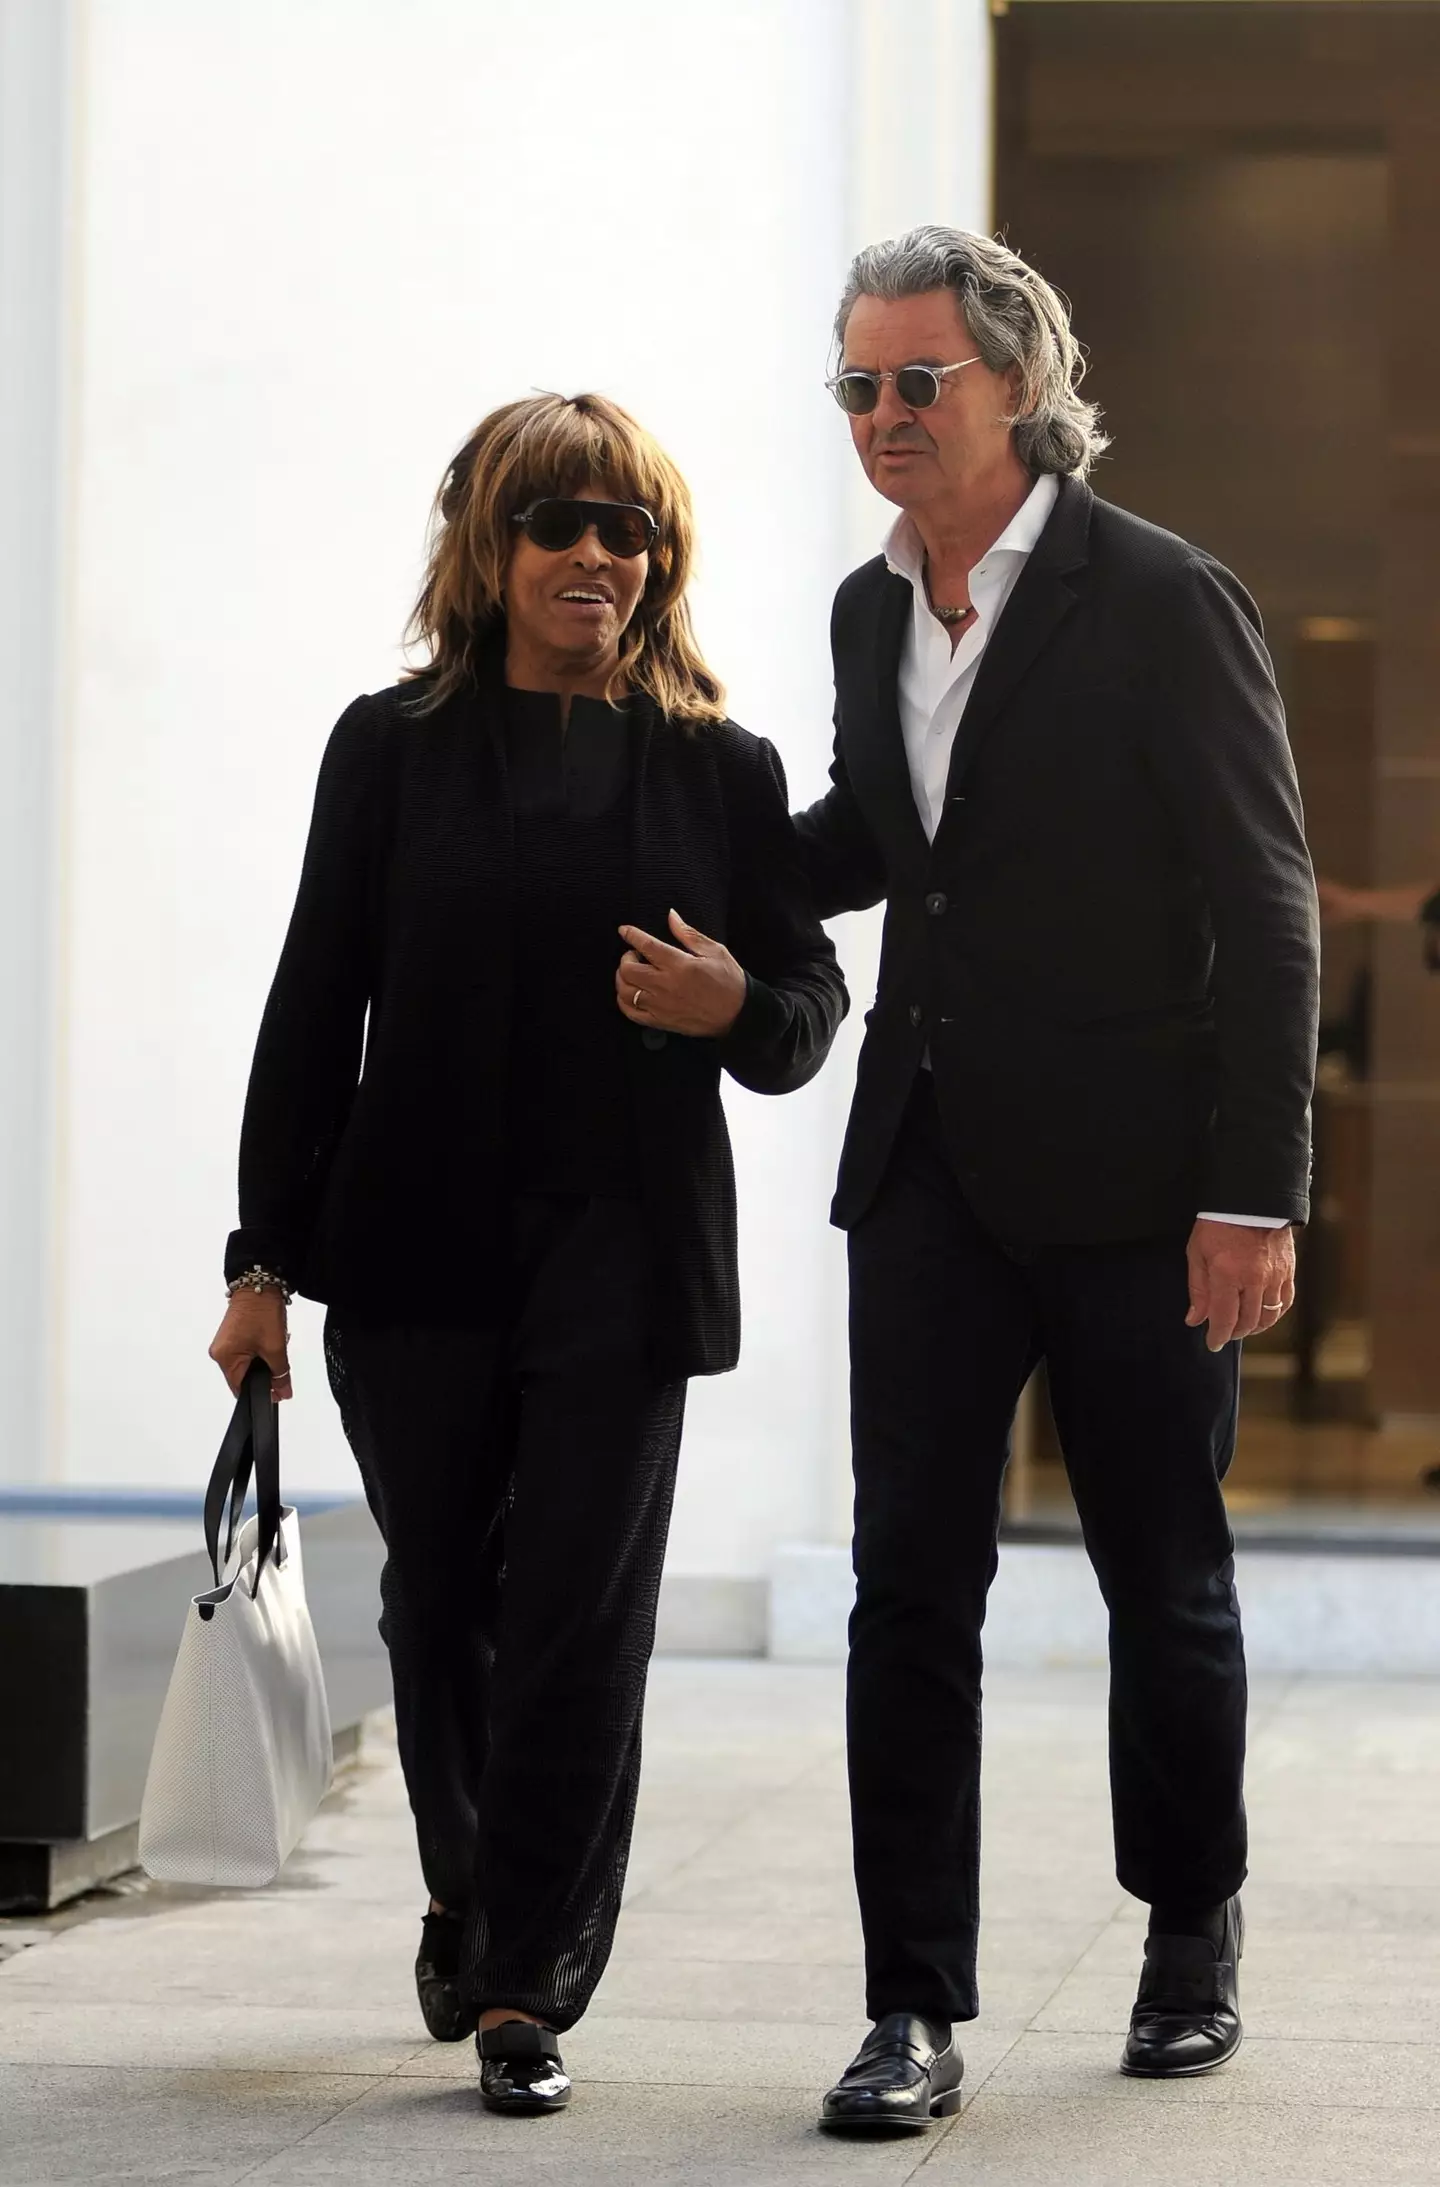 Tina Turner and Erwin Bach met in 1985.